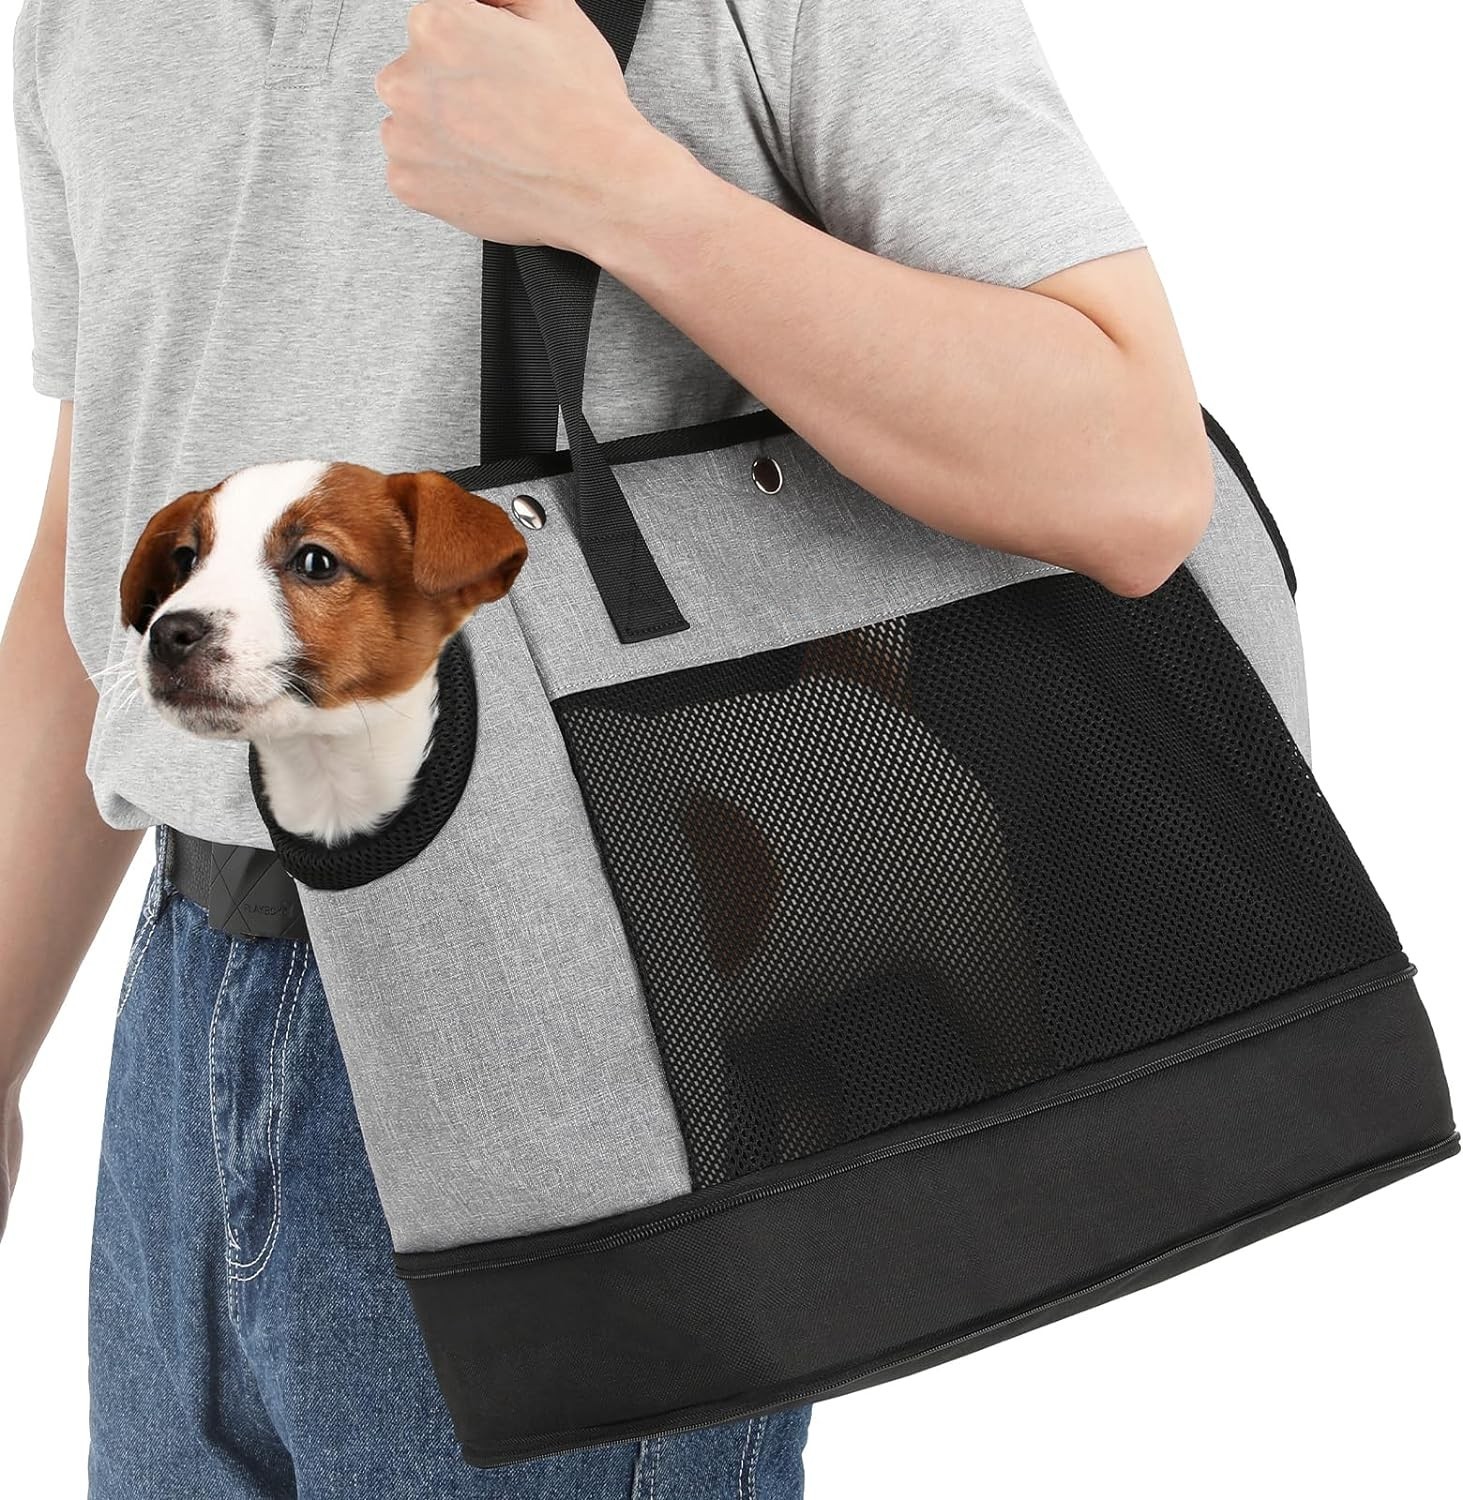 ODM OEM New Design Grey Cat puppy Carrier Transport Pet Travel Bags for Small Dogs and Cats Pet